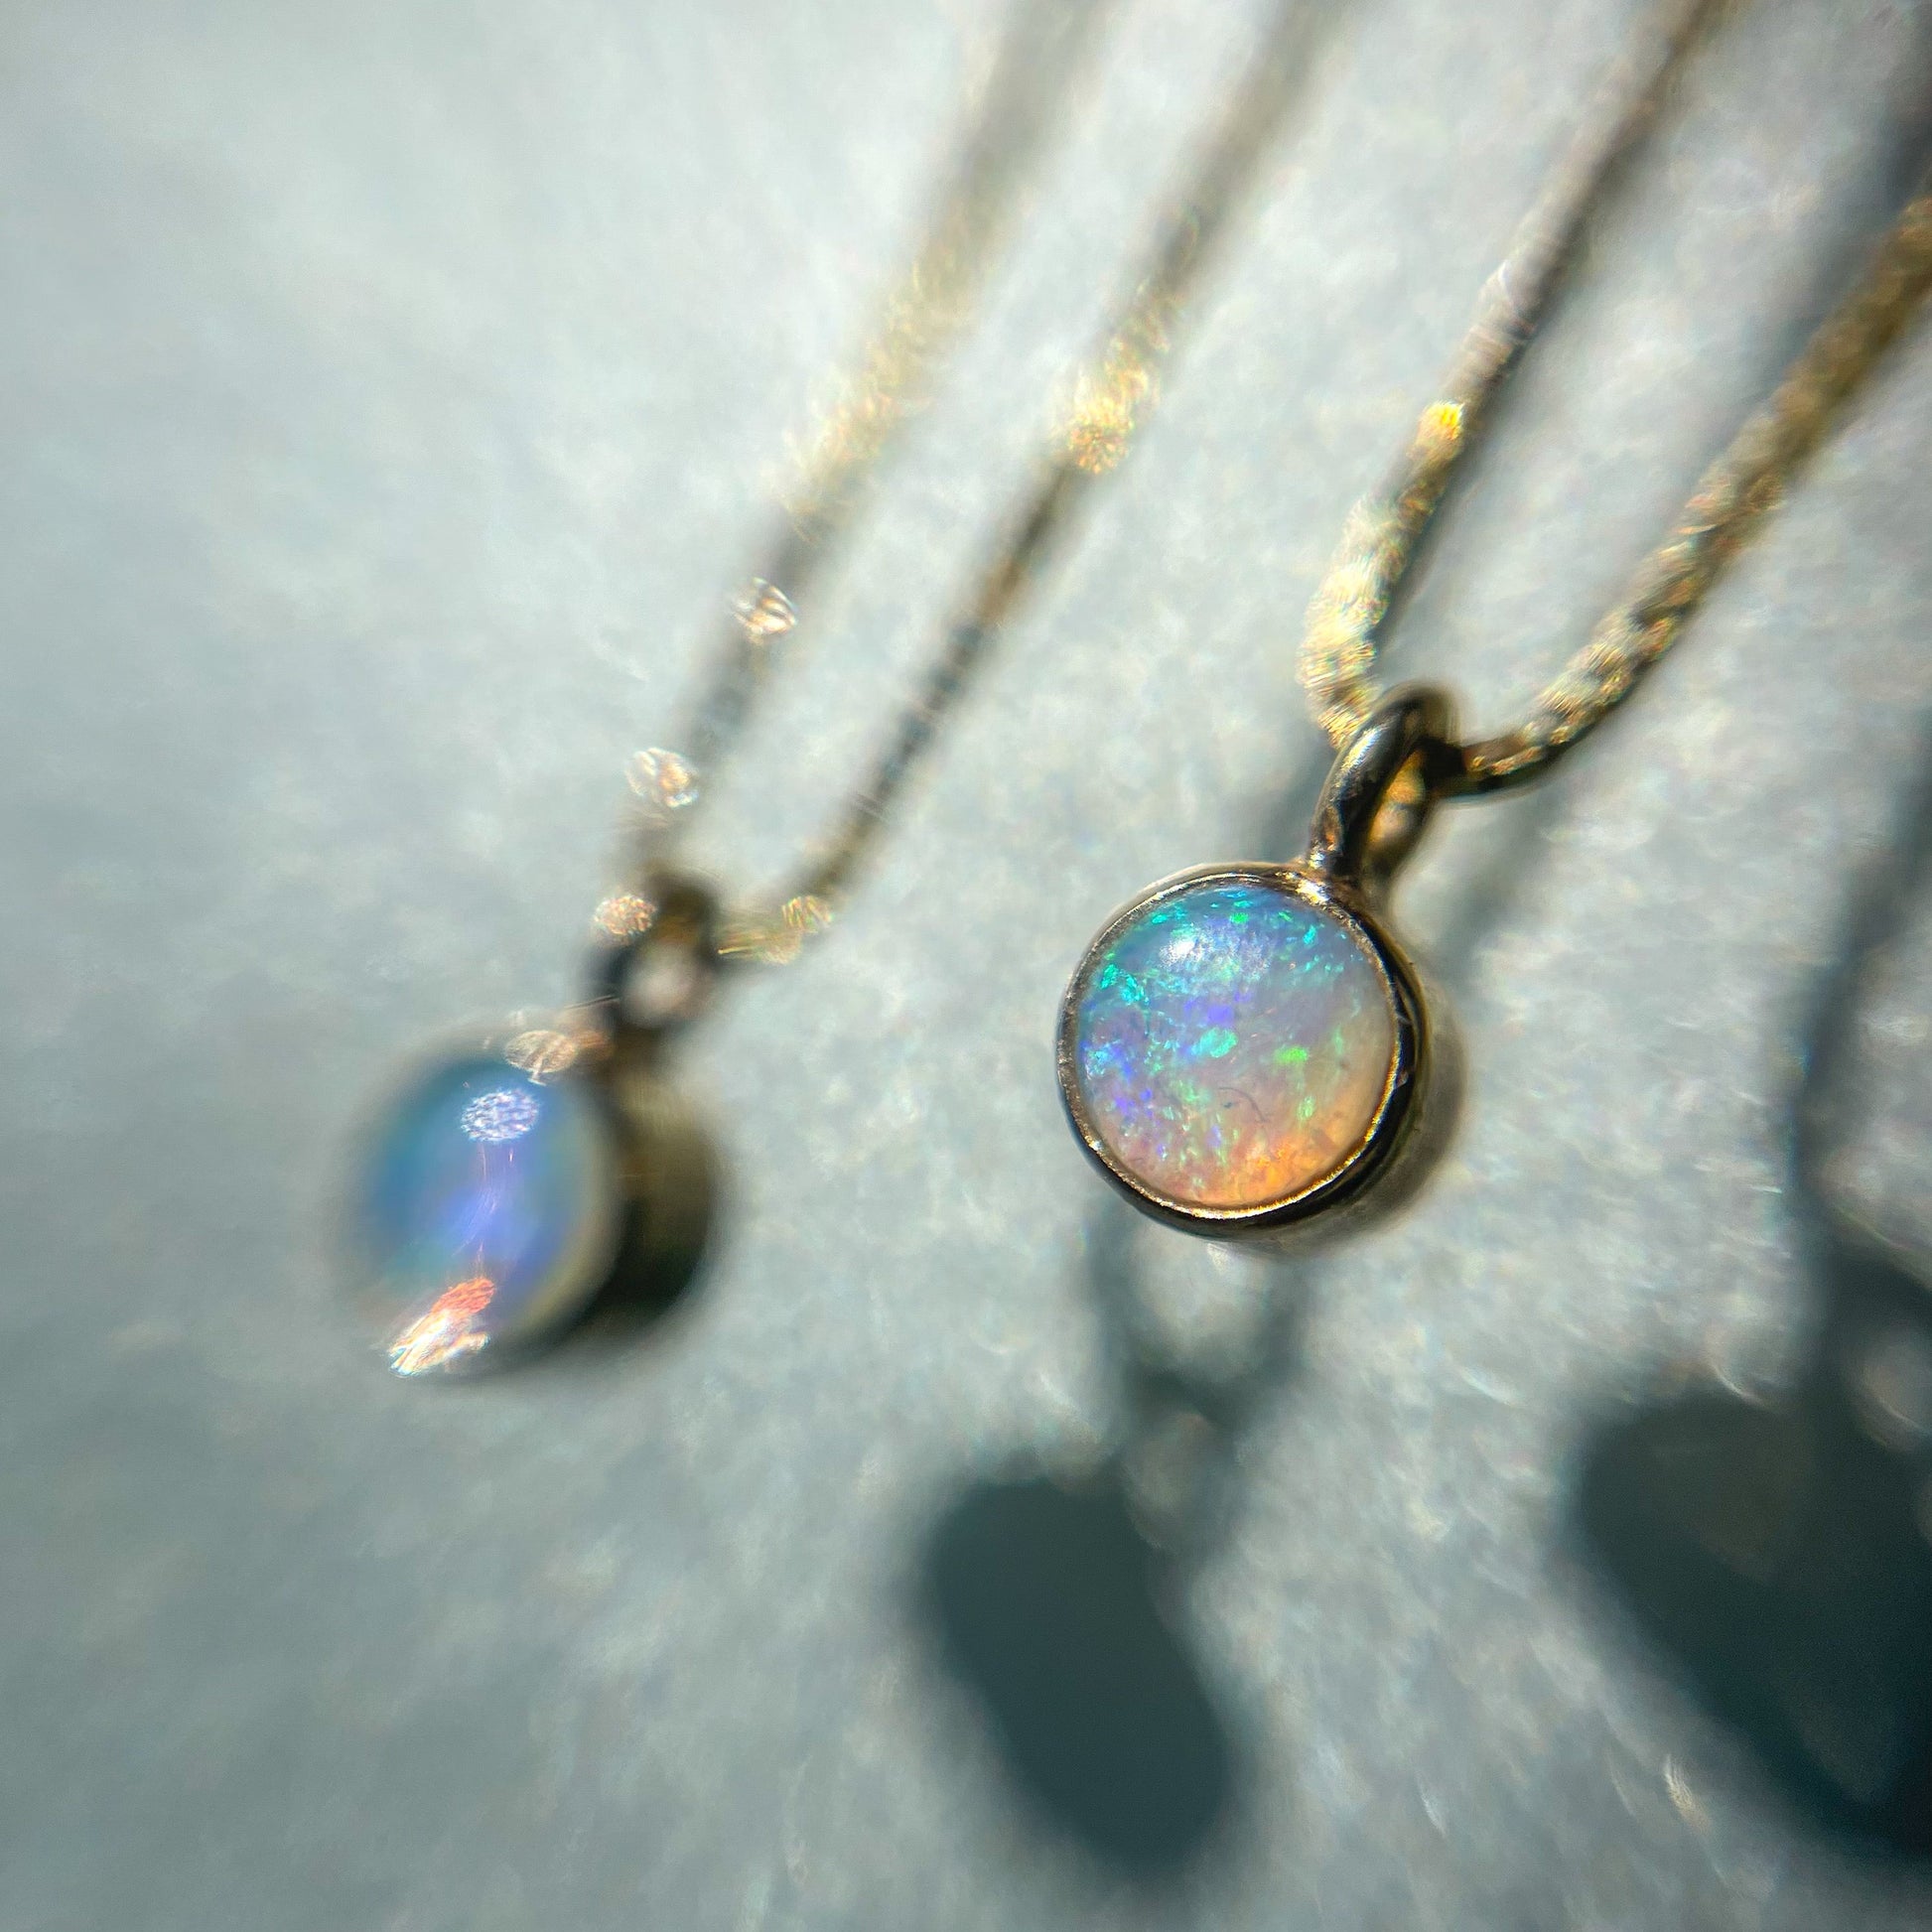 Two Australian Opal Necklaces by NIXIN Jewelry against a glass backdrop. The Crystal Opal Pendant is set in 14k gold.